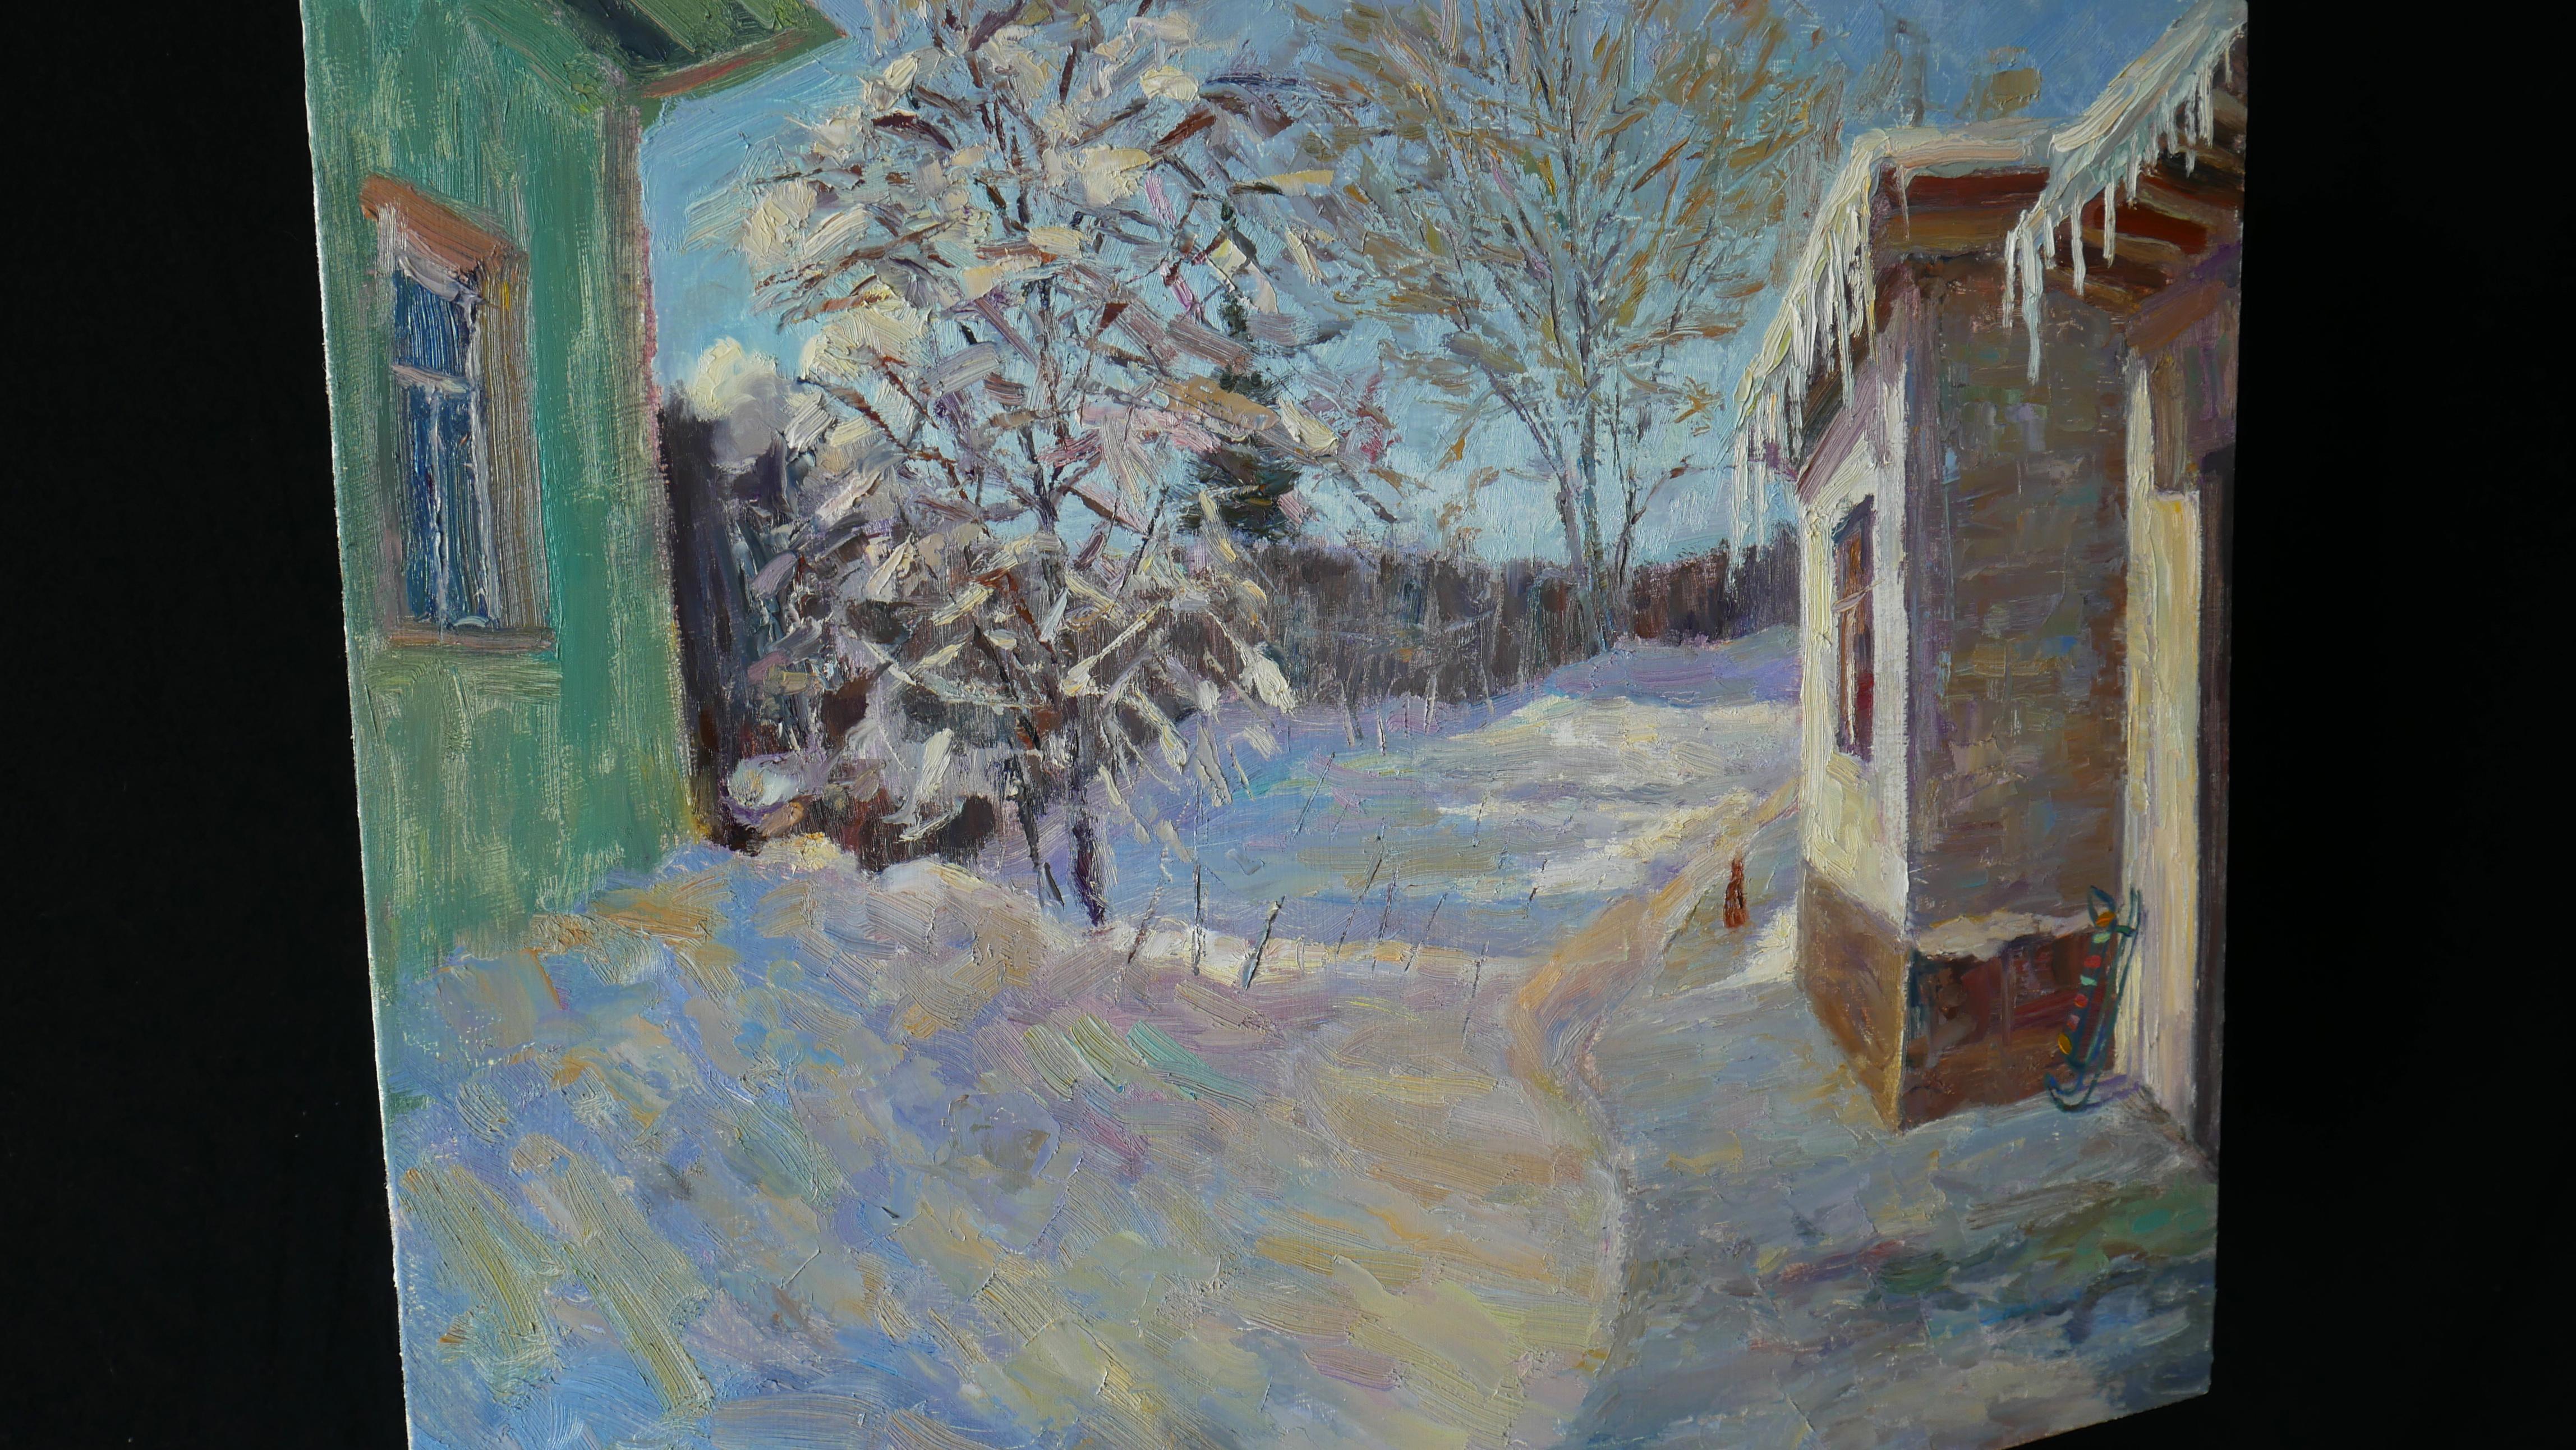 The March Yard - sunny snowy landscape painting - Impressionist Painting by Nikolay Dmitriev